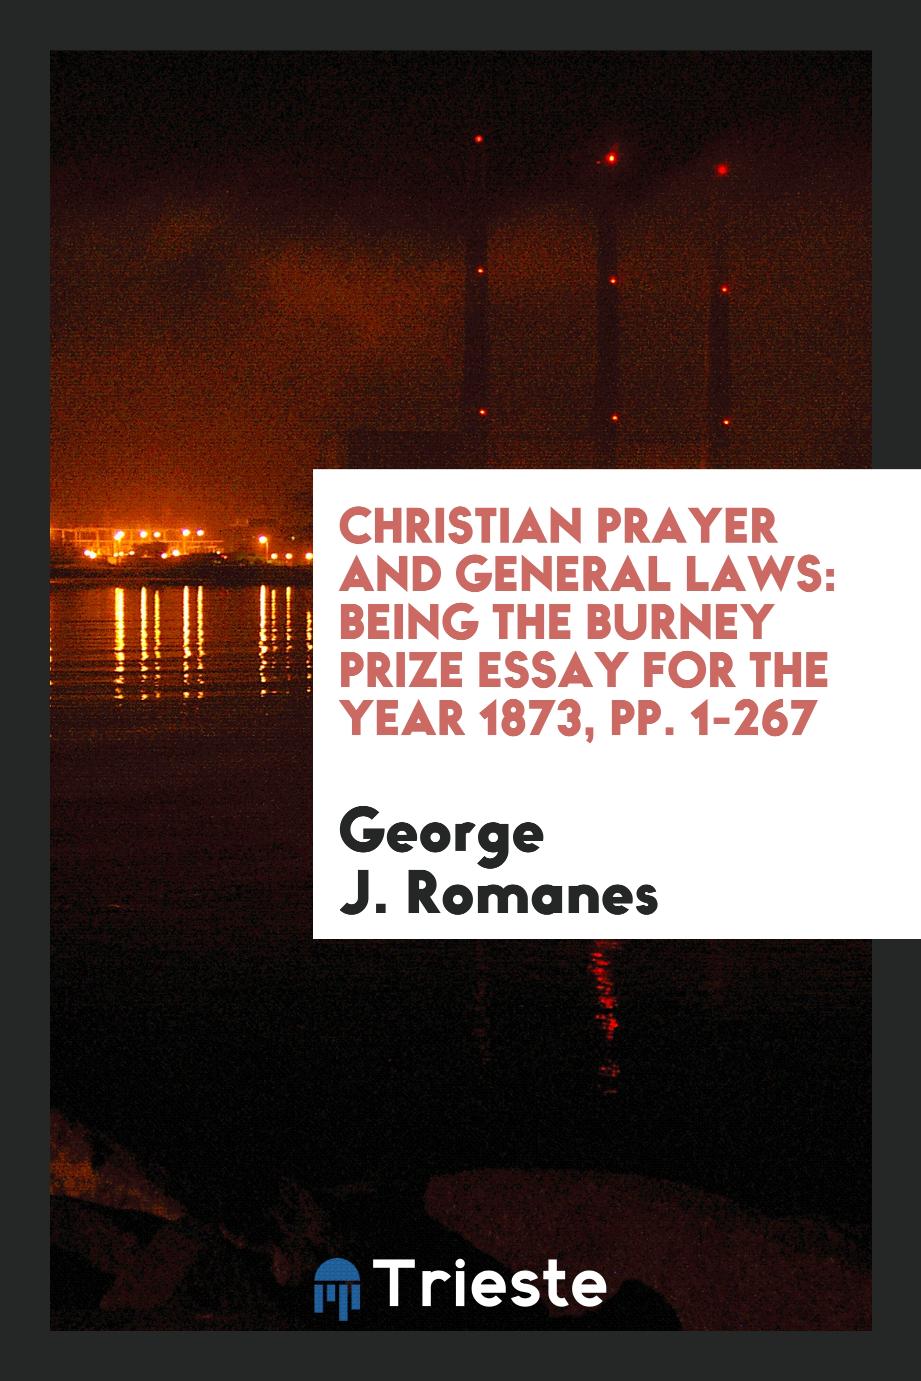 Christian Prayer and General Laws: Being the Burney Prize Essay for the Year 1873, pp. 1-267